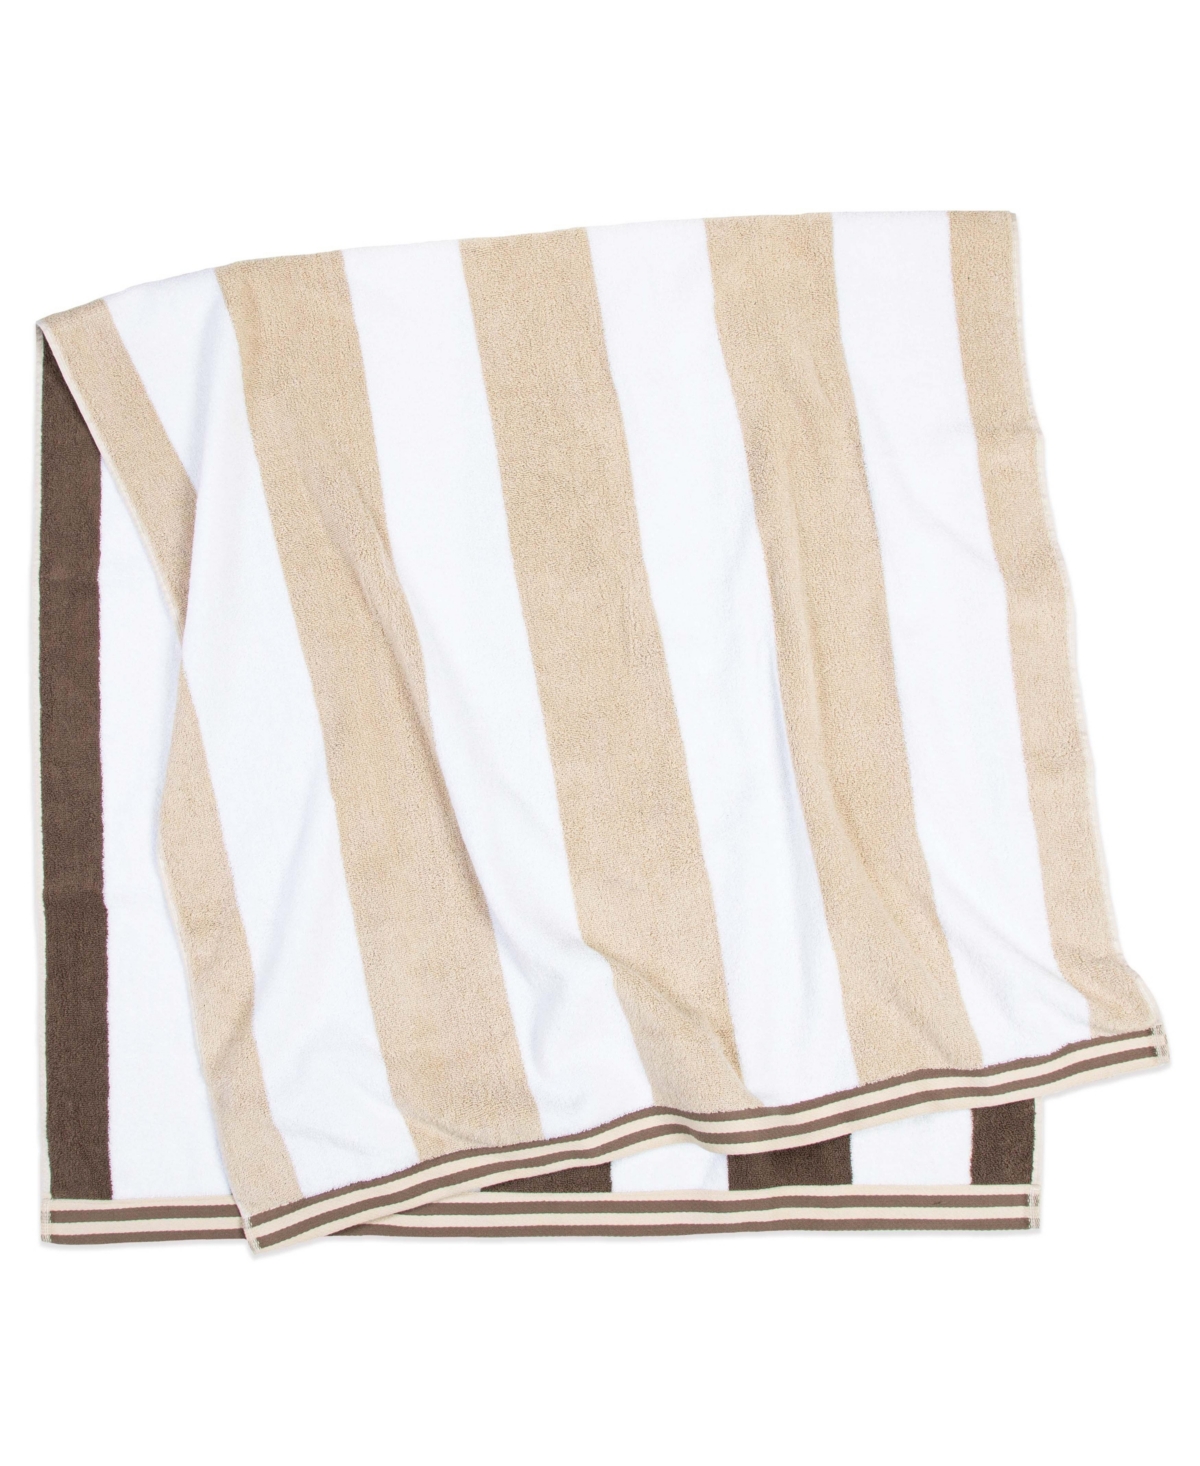 Aston And Arden Reversible Luxury Beach Towel (35x70 In., 600 Gsm), Striped Color Options, Oversized, Thick, Soft Ri In Brown/beige